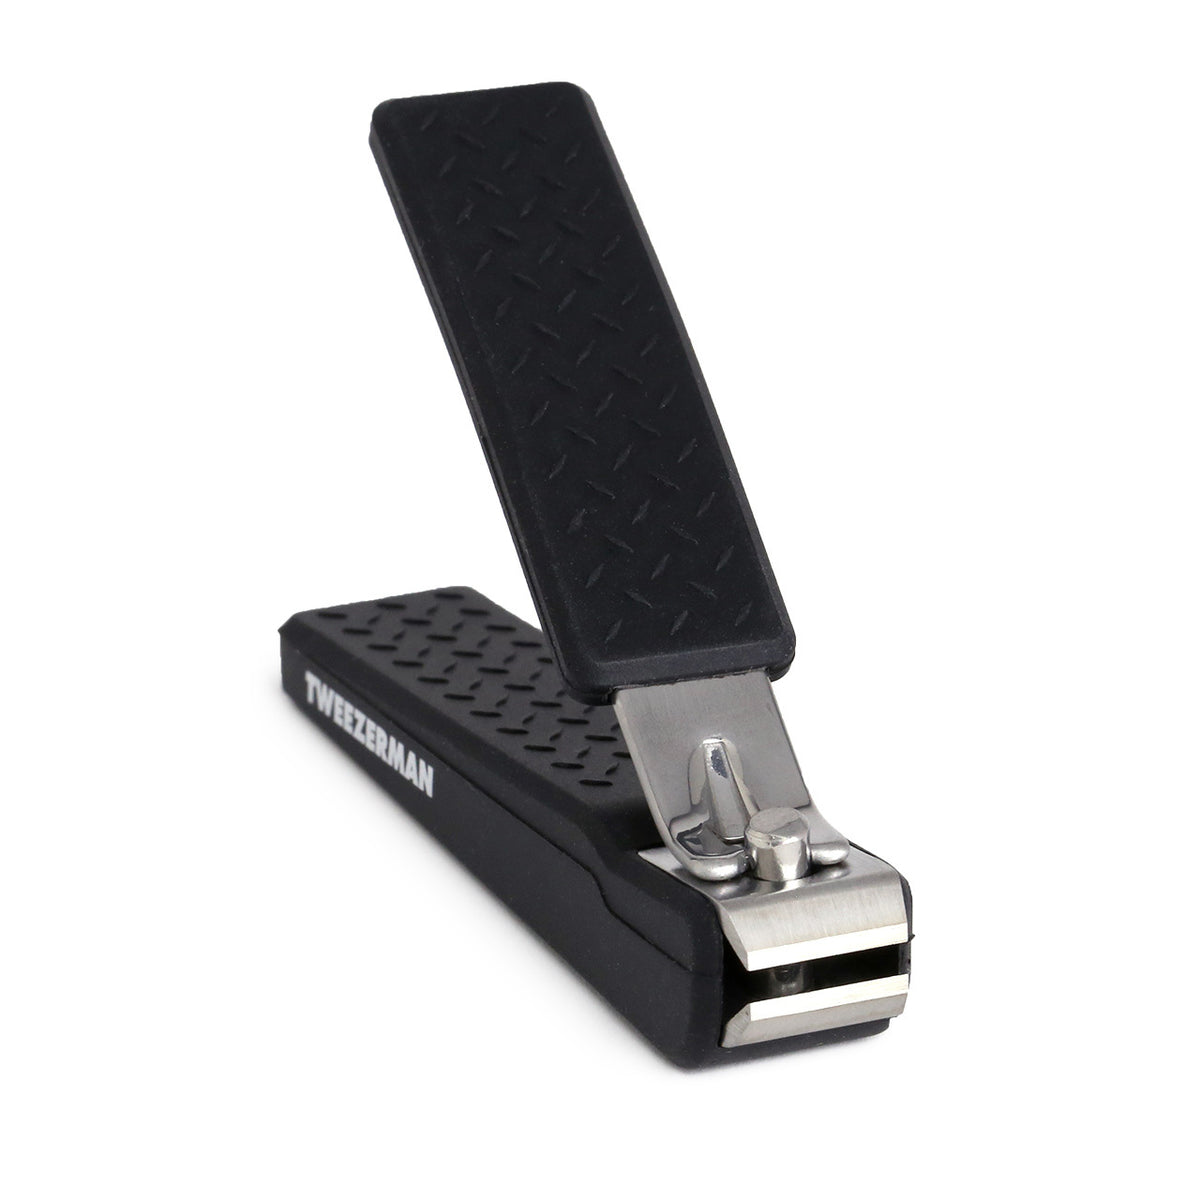 Tweezerman toenail clippers will deal with the toughest you&#39;ve got.